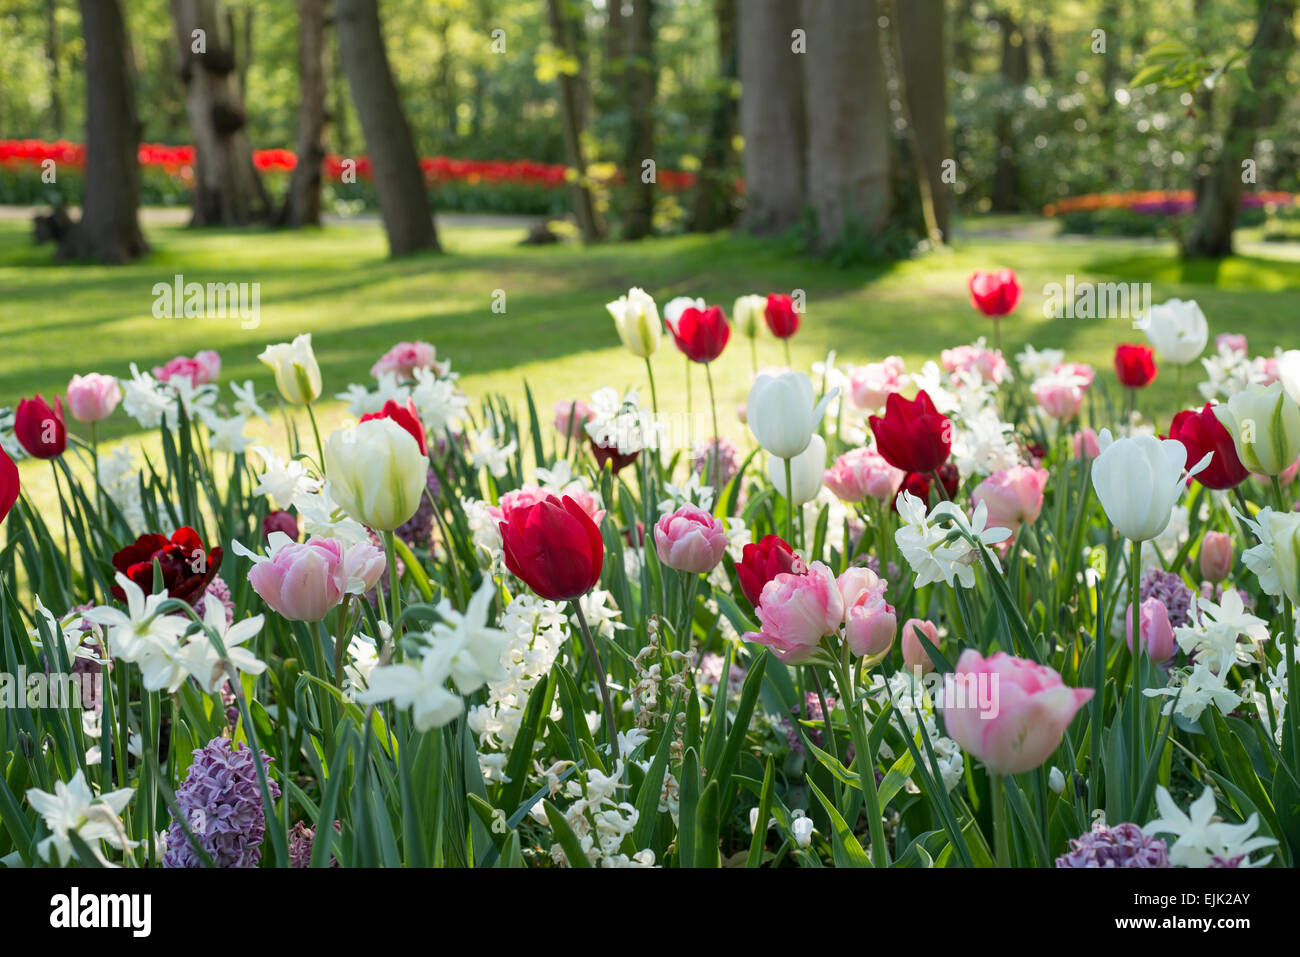 Spring flower bed with pink, red and white tulips (Tulipa) and white narcissus in a park Stock Photo